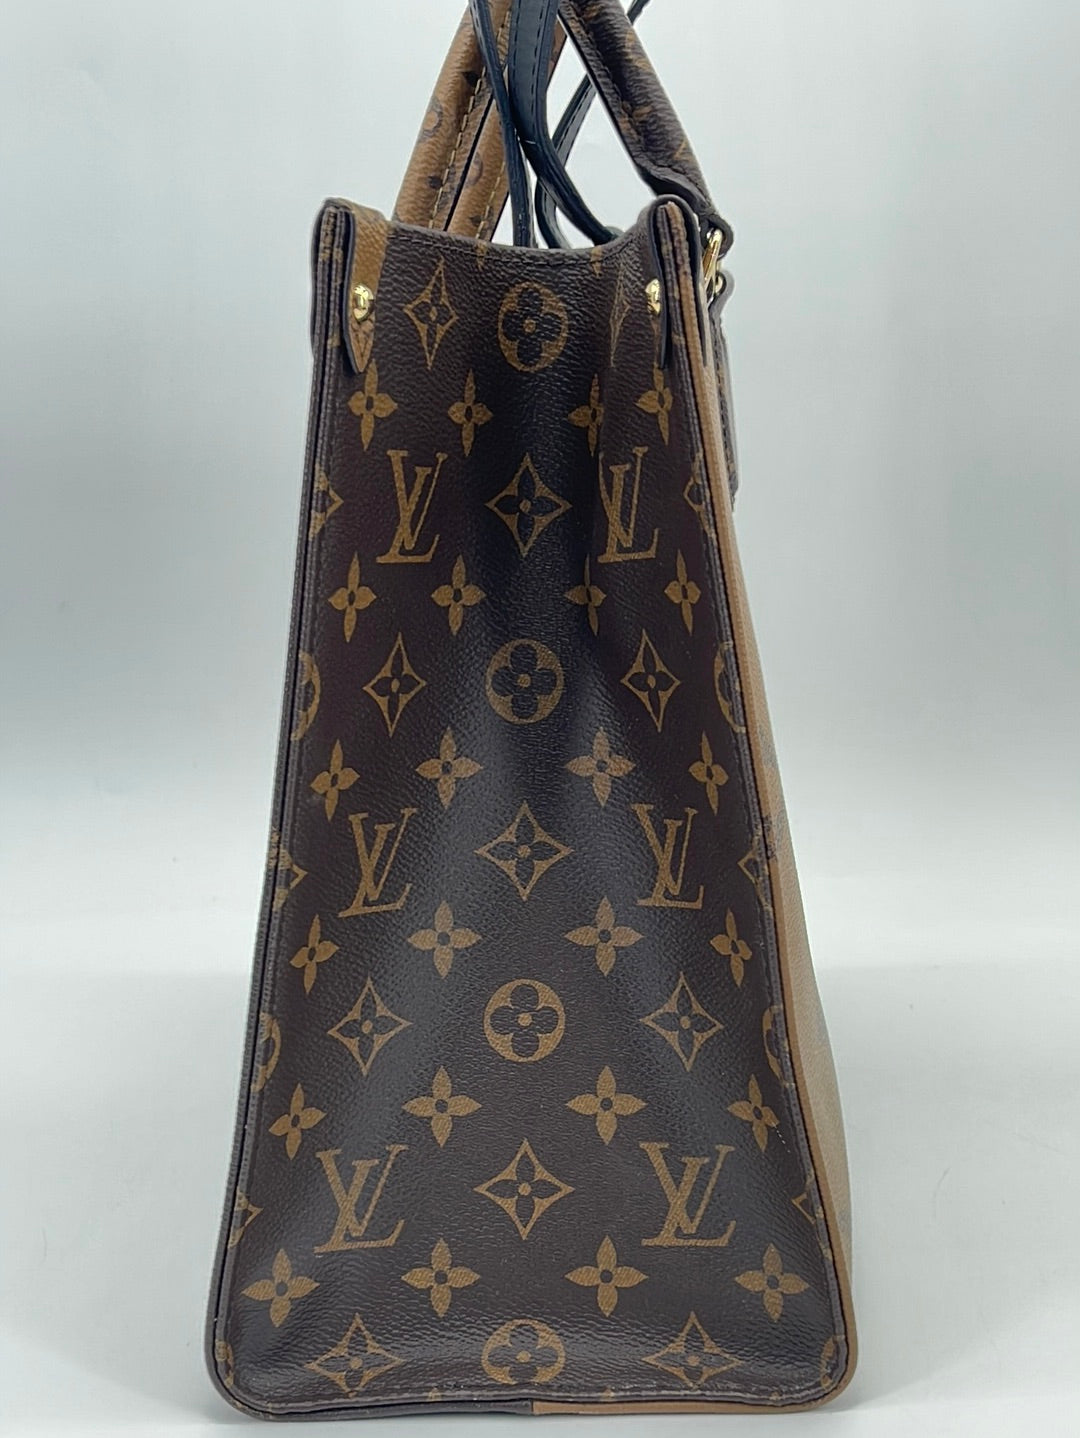 PRELOVED Louis Vuitton Giant Reverse Monogram OnTheGo MM Tote SD4200 102423